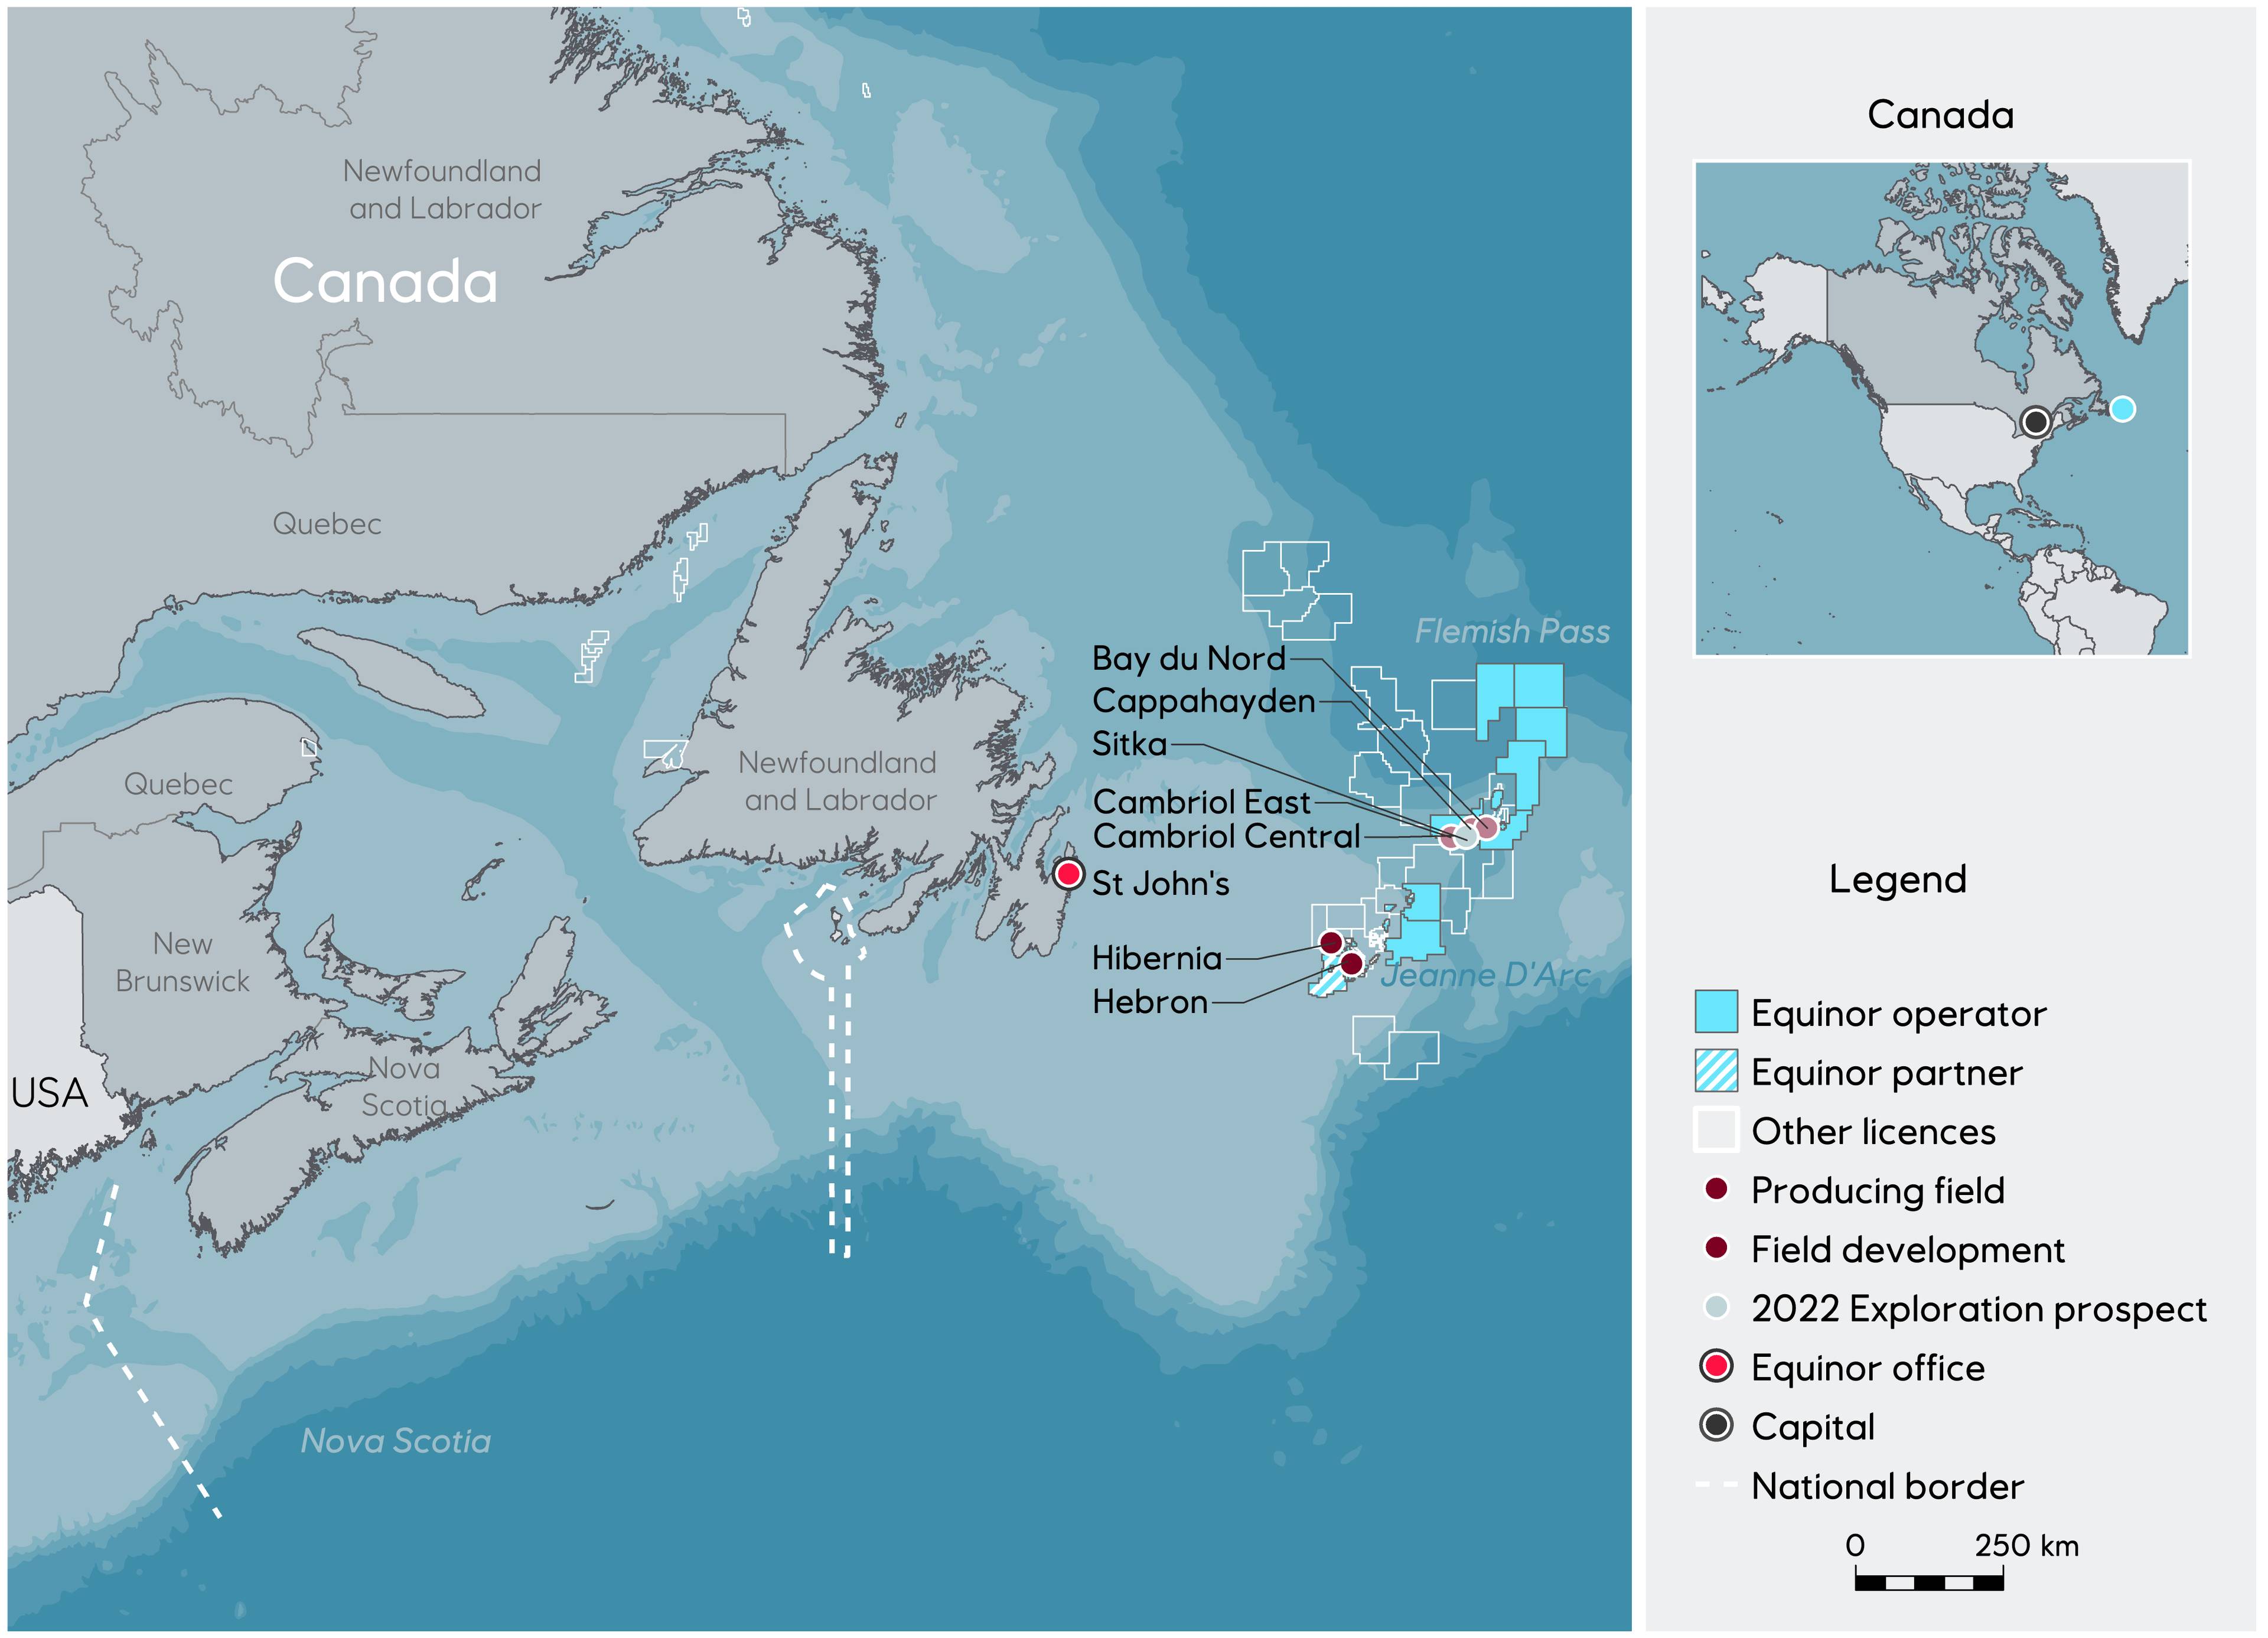 Map with overview of licences and discoveries offshore Newfoundland